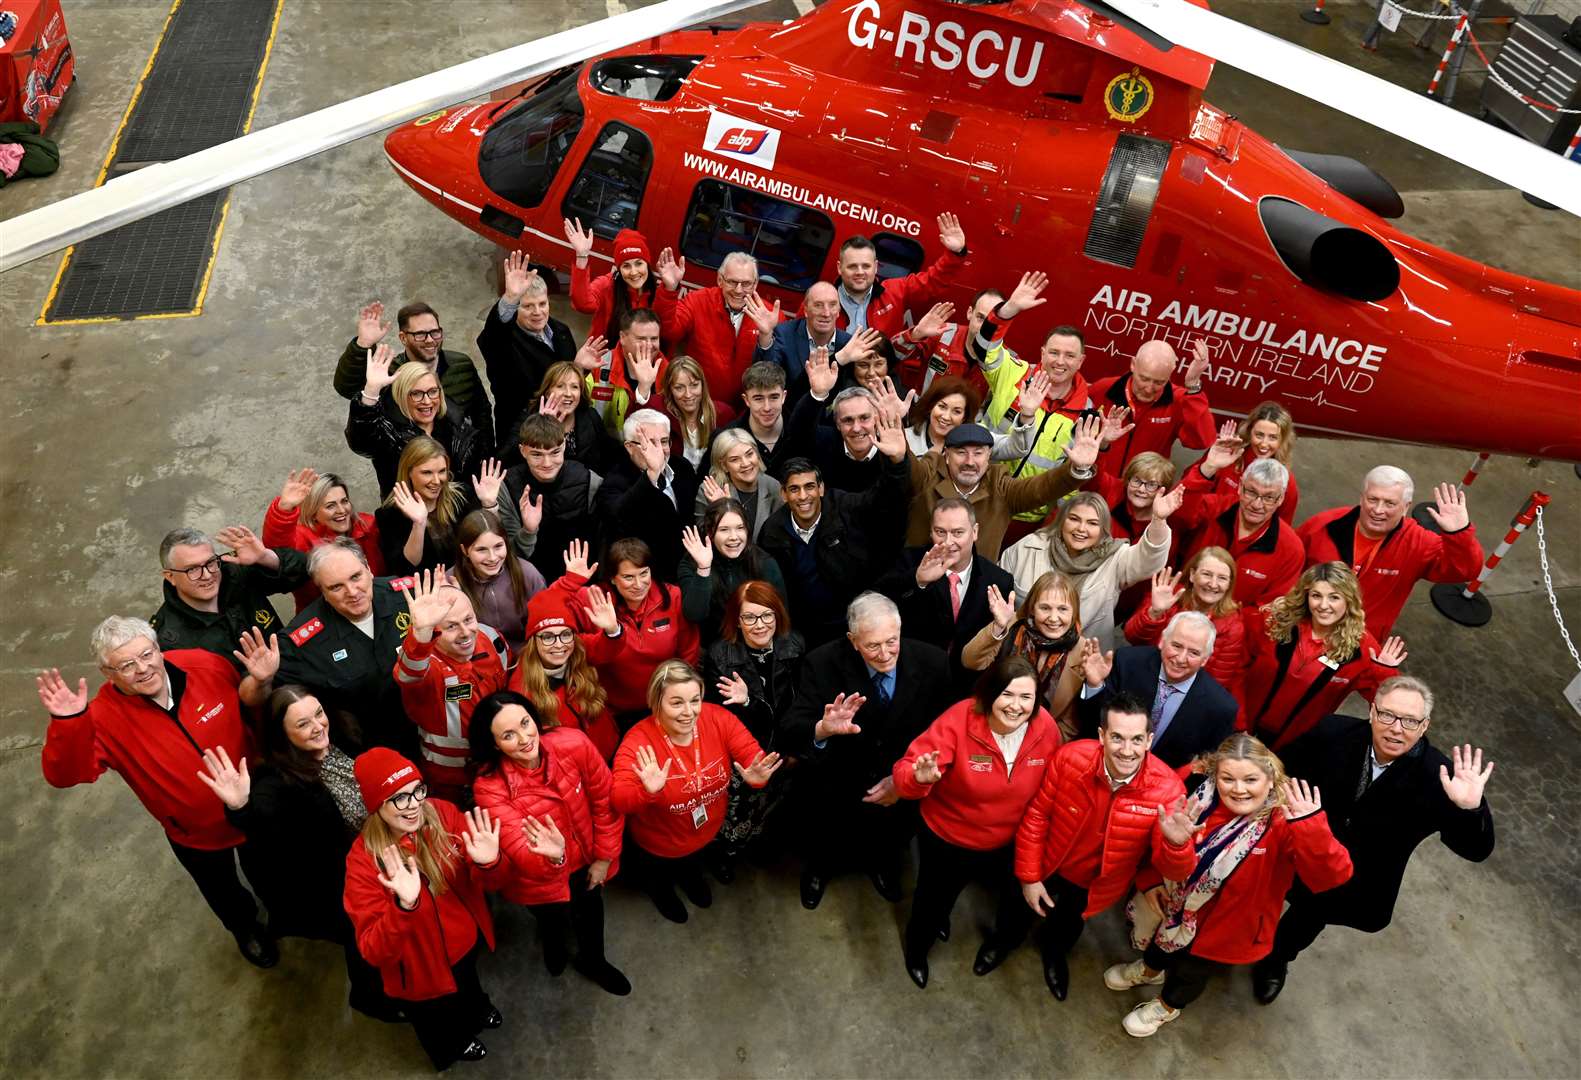 Prime Minister Rishi Sunak at the headquarters of Air Ambulance Northern Ireland in Co Antrim (Carrie Davenport/PA)